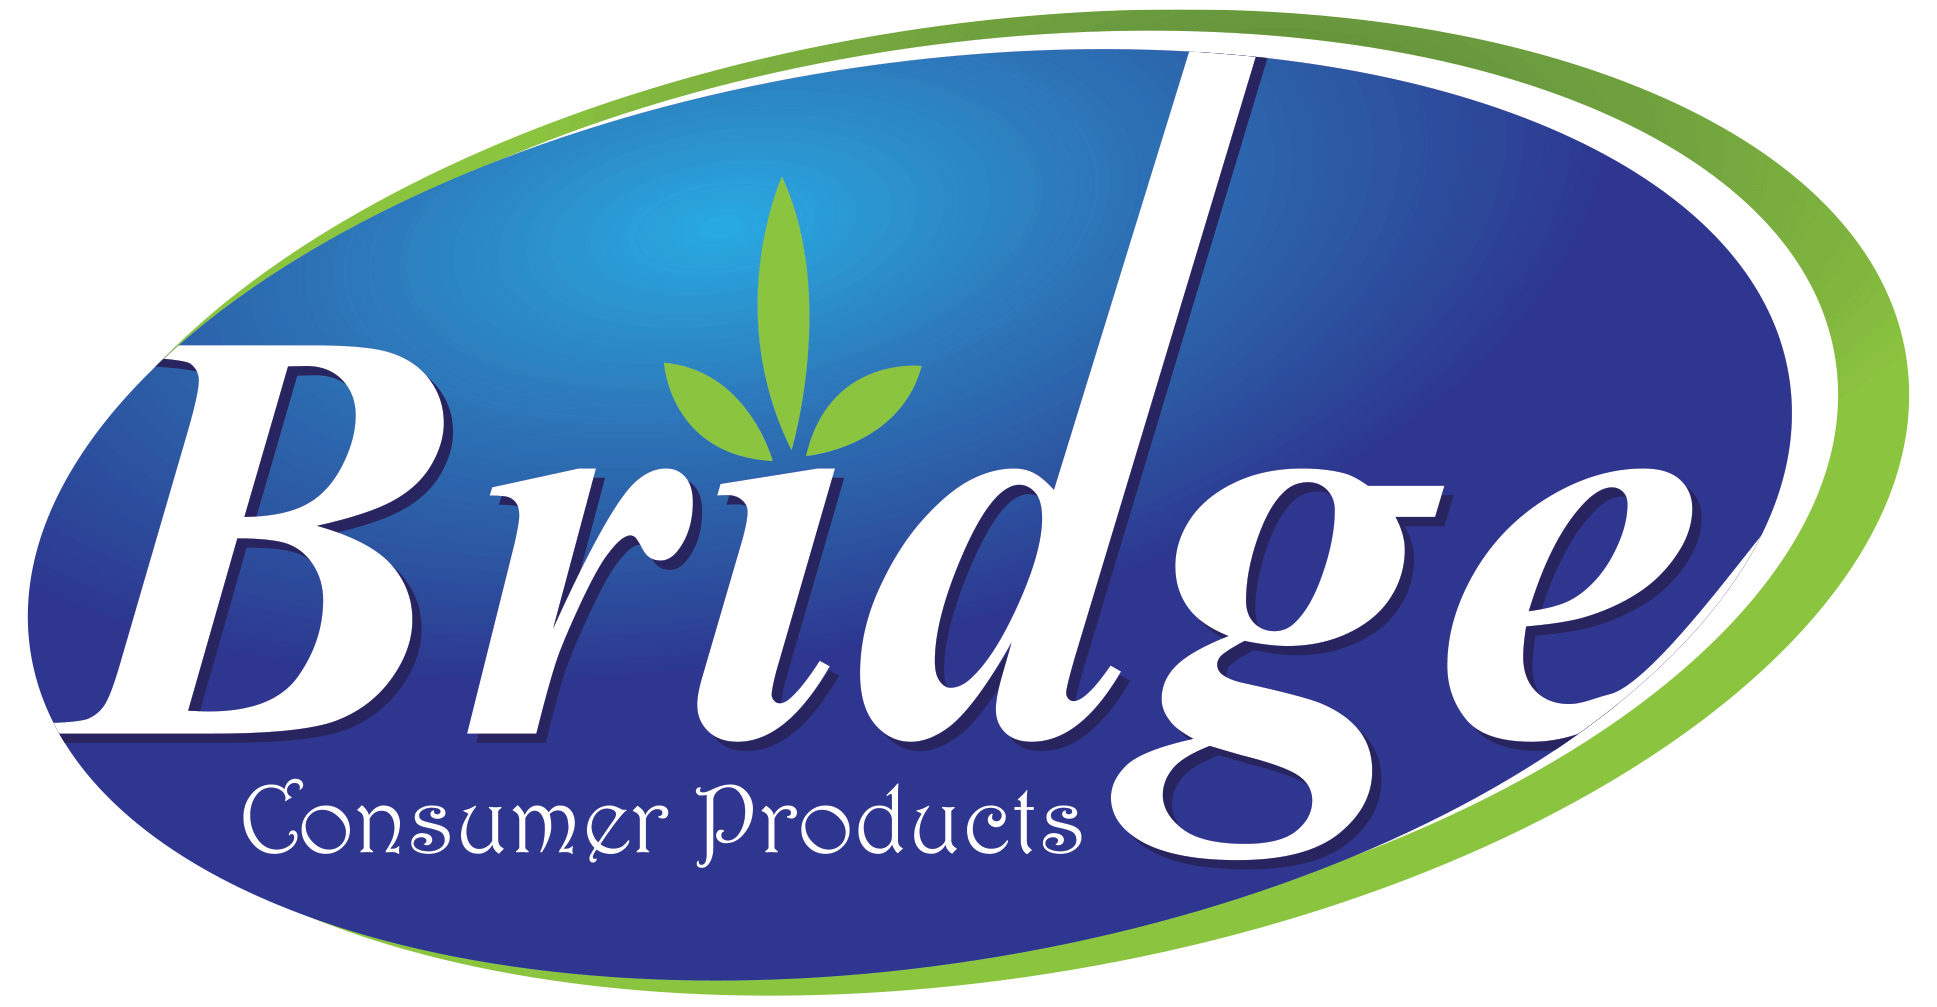 Consumer Products Logo - Bridge Consumer Products Limited